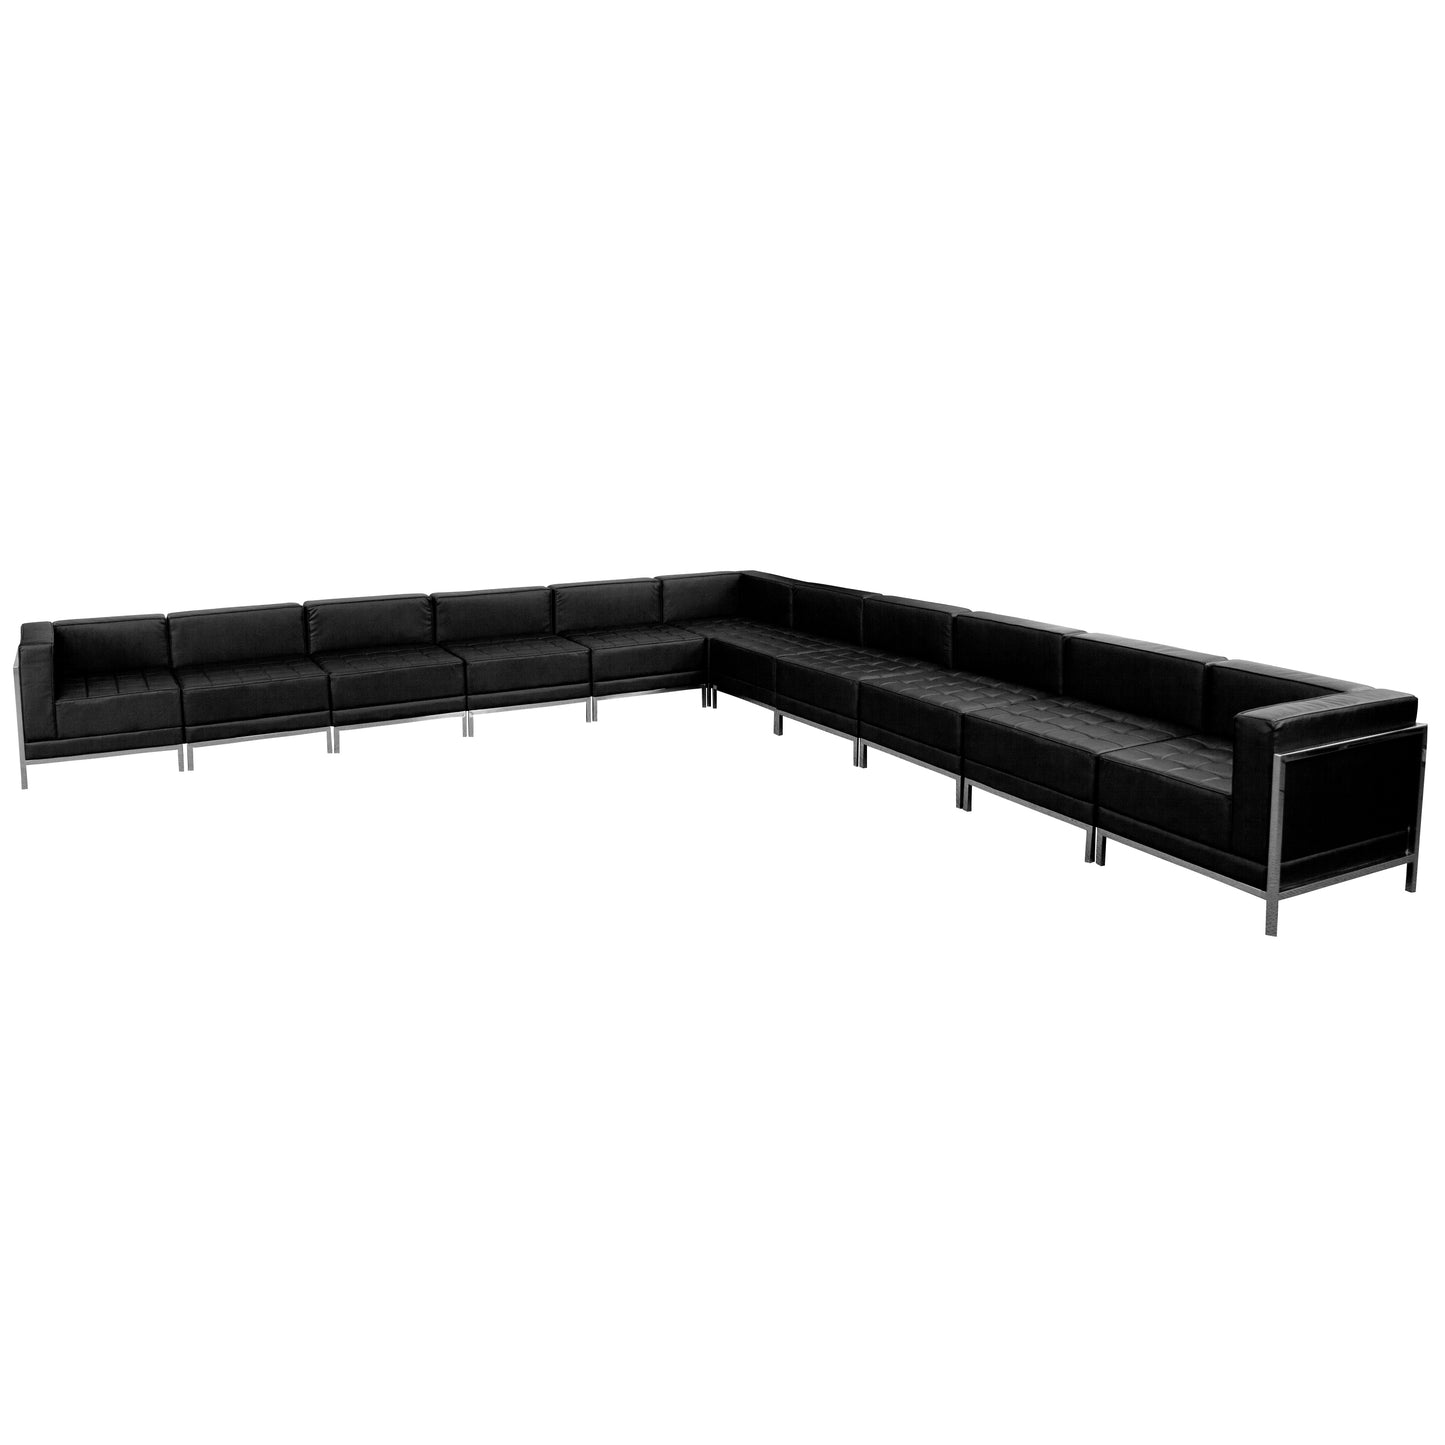 Black Leather Sectional, 11 PC ZB-IMAG-SECT-SET2-GG